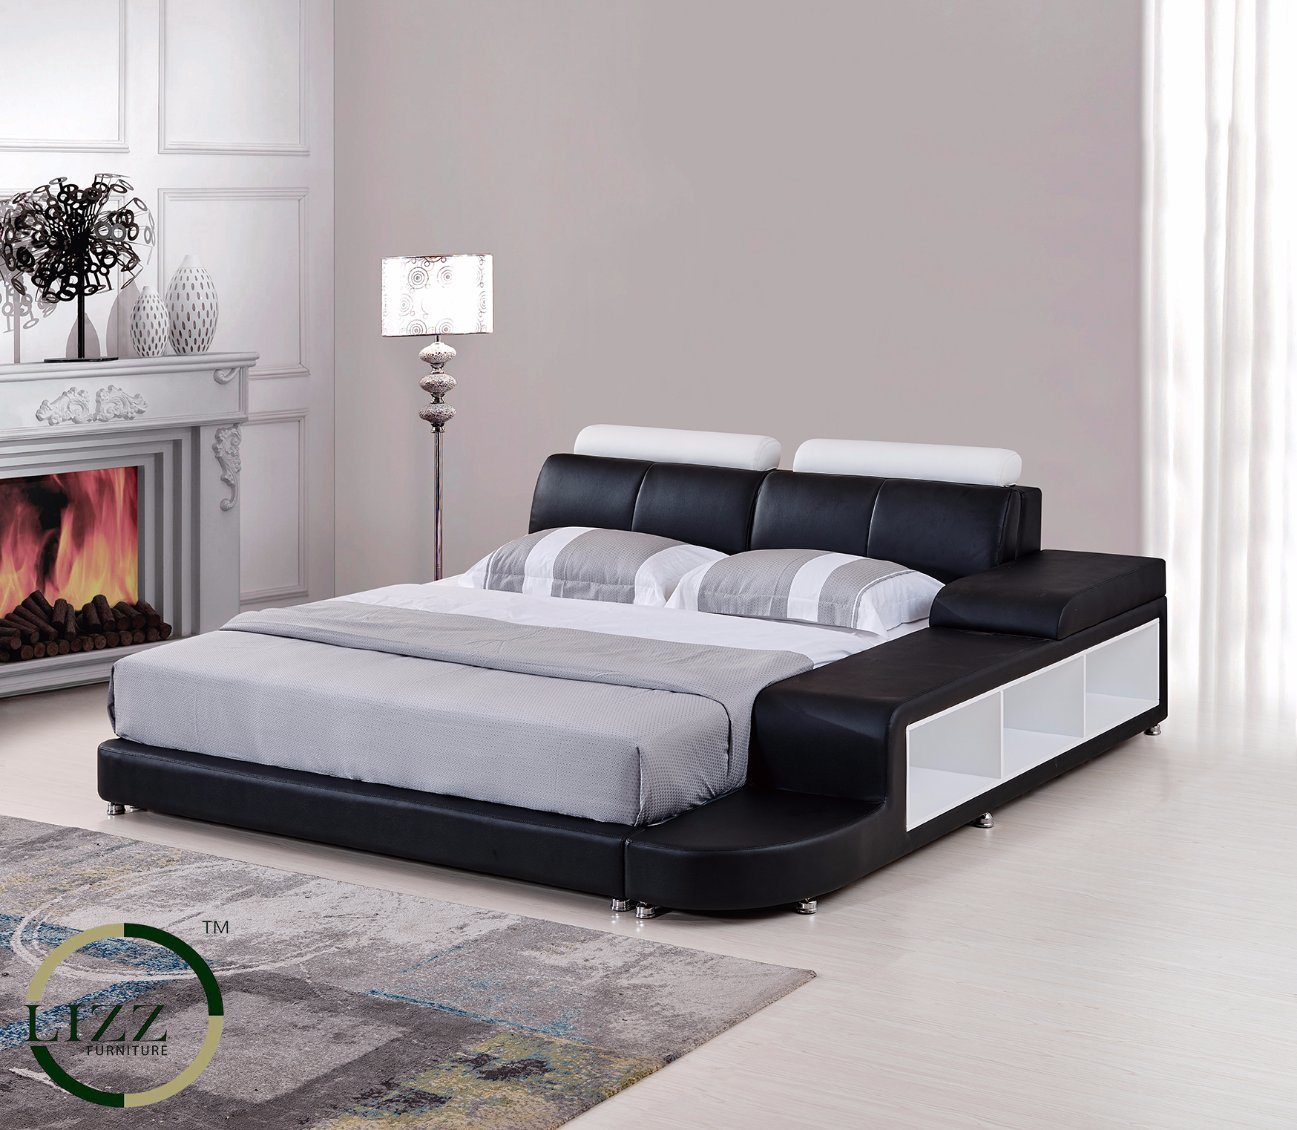 Leather Modern Design European Style Double Bed